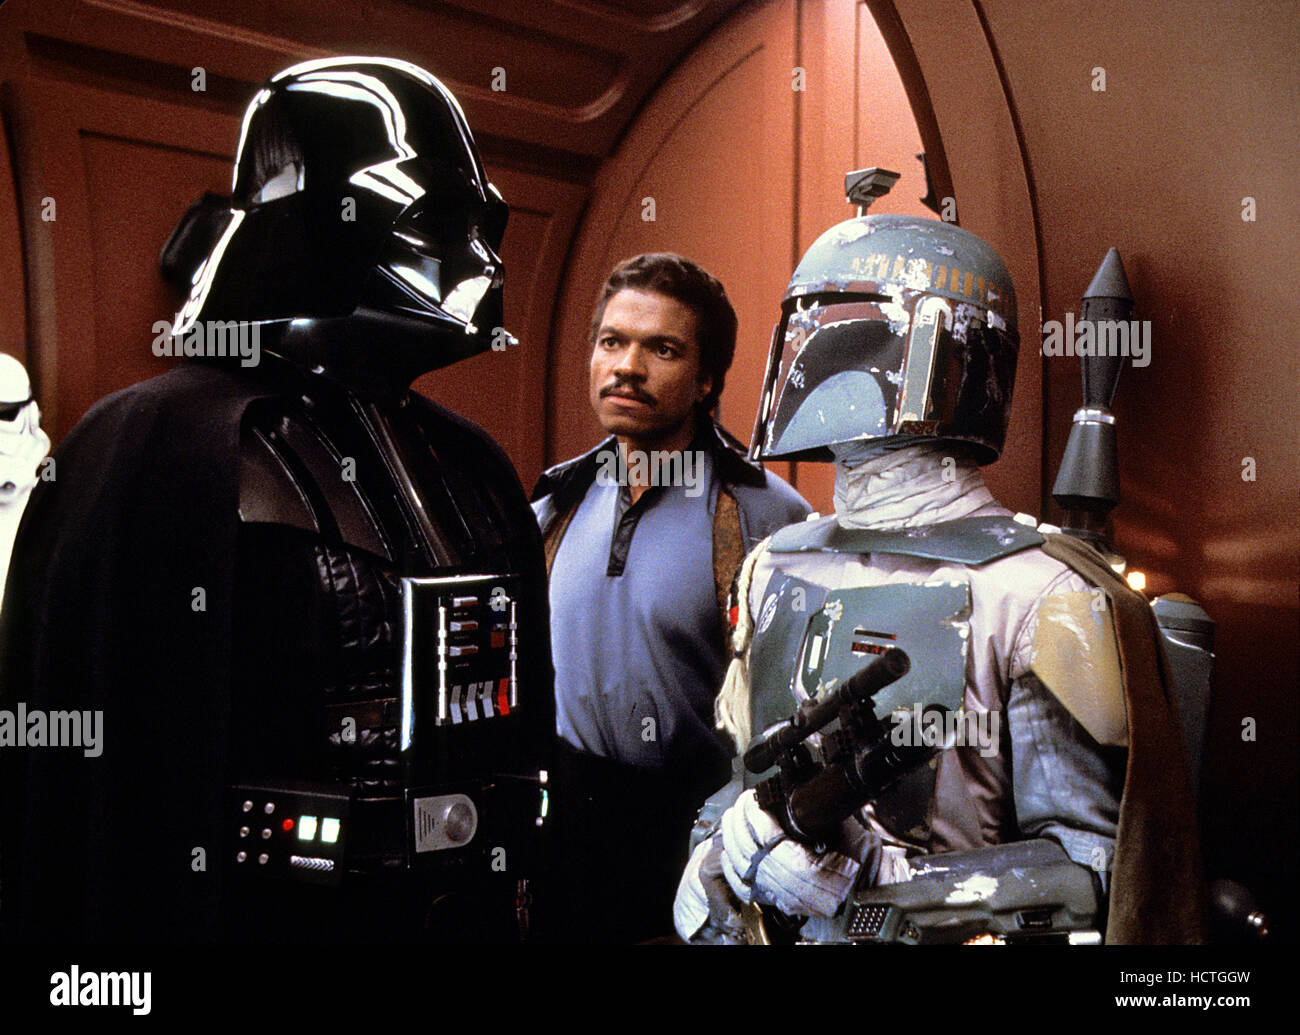 STAR WARS: EPISODE V - THE EMPIRE STRIKES BACK, Dave Prowse, Billy Dee Williams, Jeremy Bulloch, 1980. ©Lucasfilms/courtesy Stock Photo